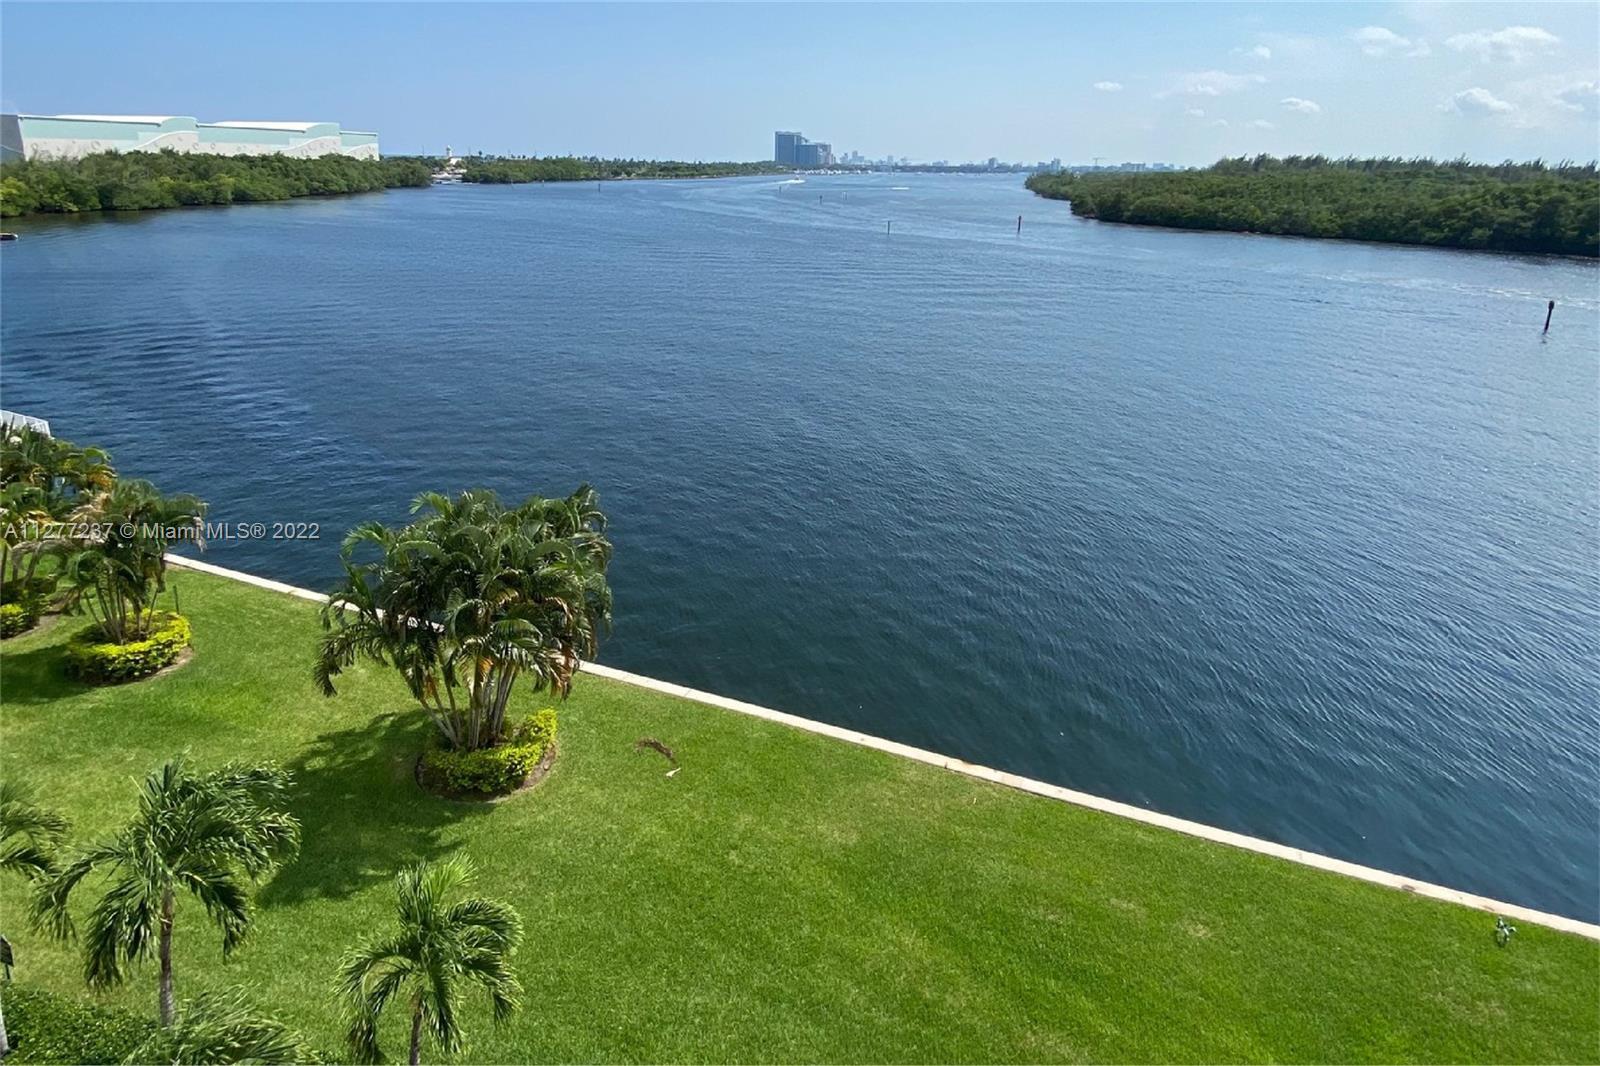 Excellent Opportunity to own a spacious 2/2 Condo with an Amazing waterfront view overlooking the Be